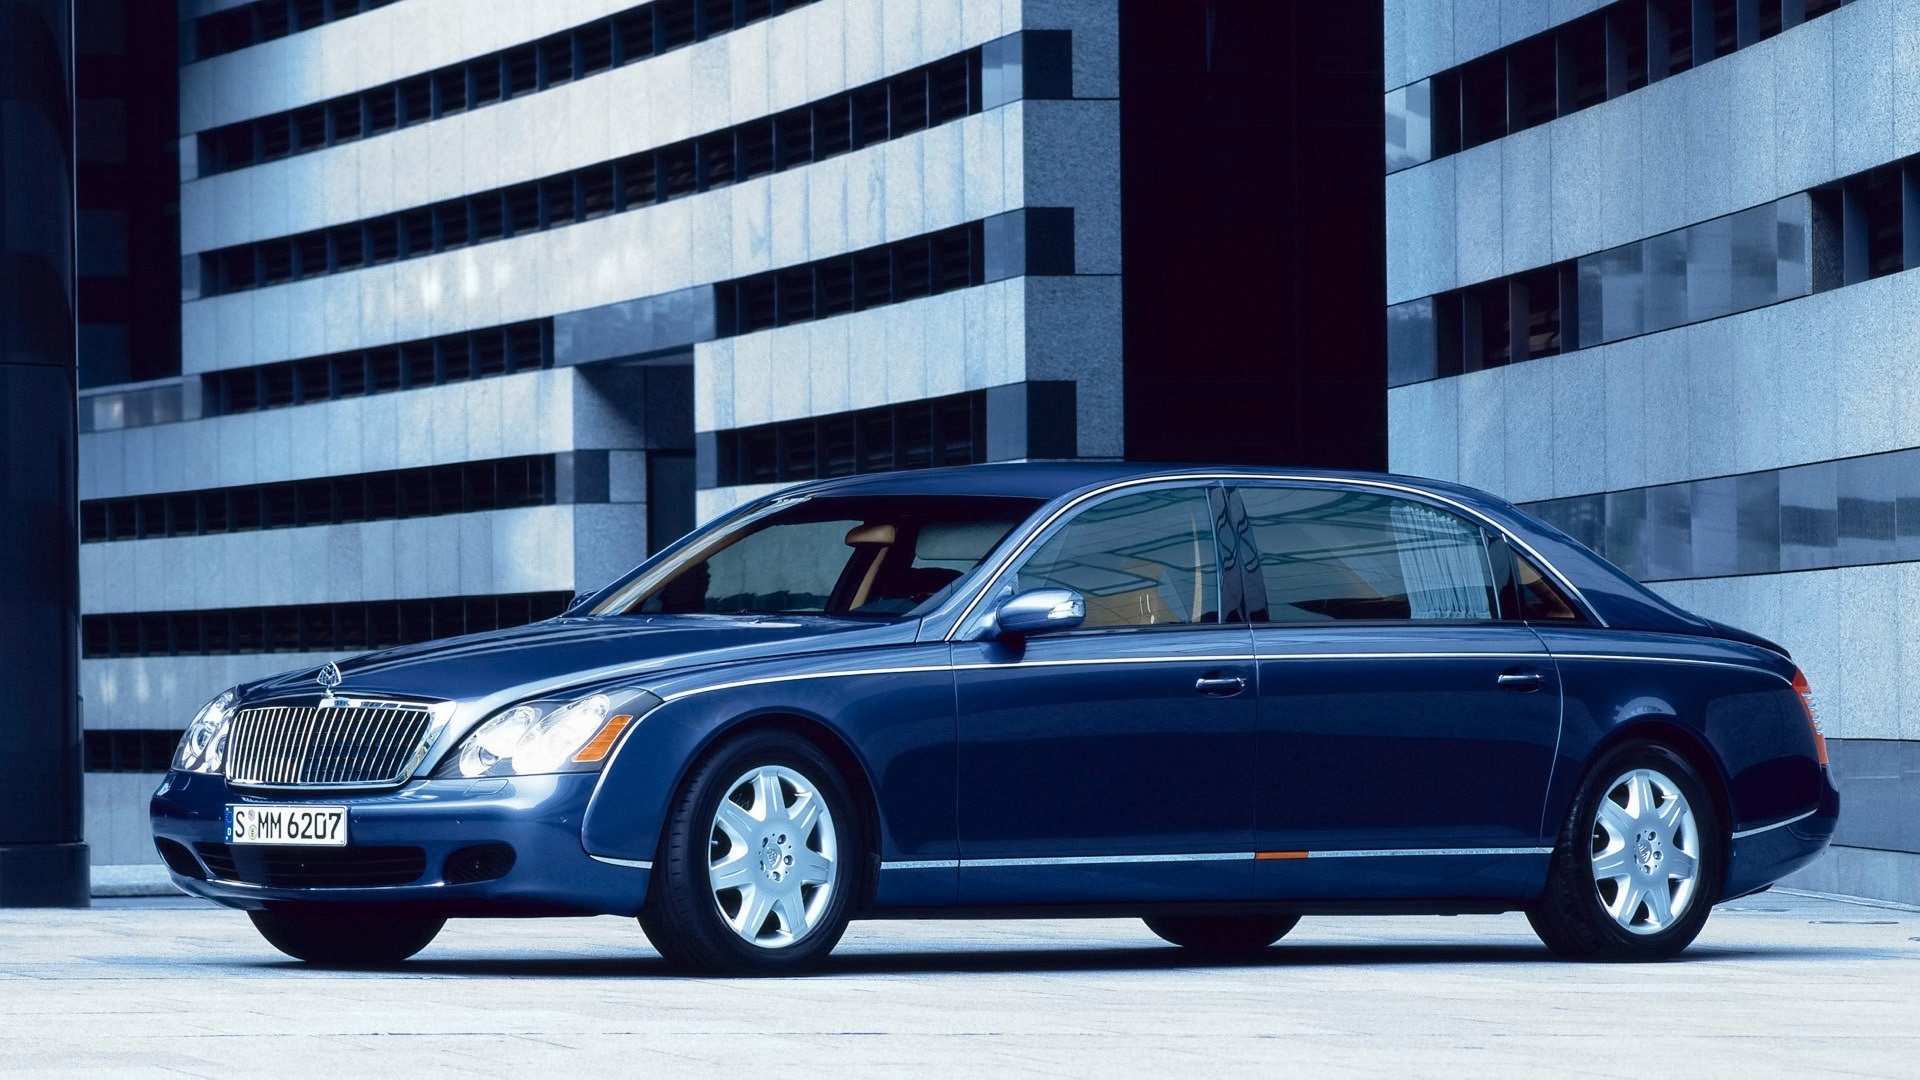 Maybach 62 Outside Left Front for 1920 x 1080 HDTV 1080p resolution